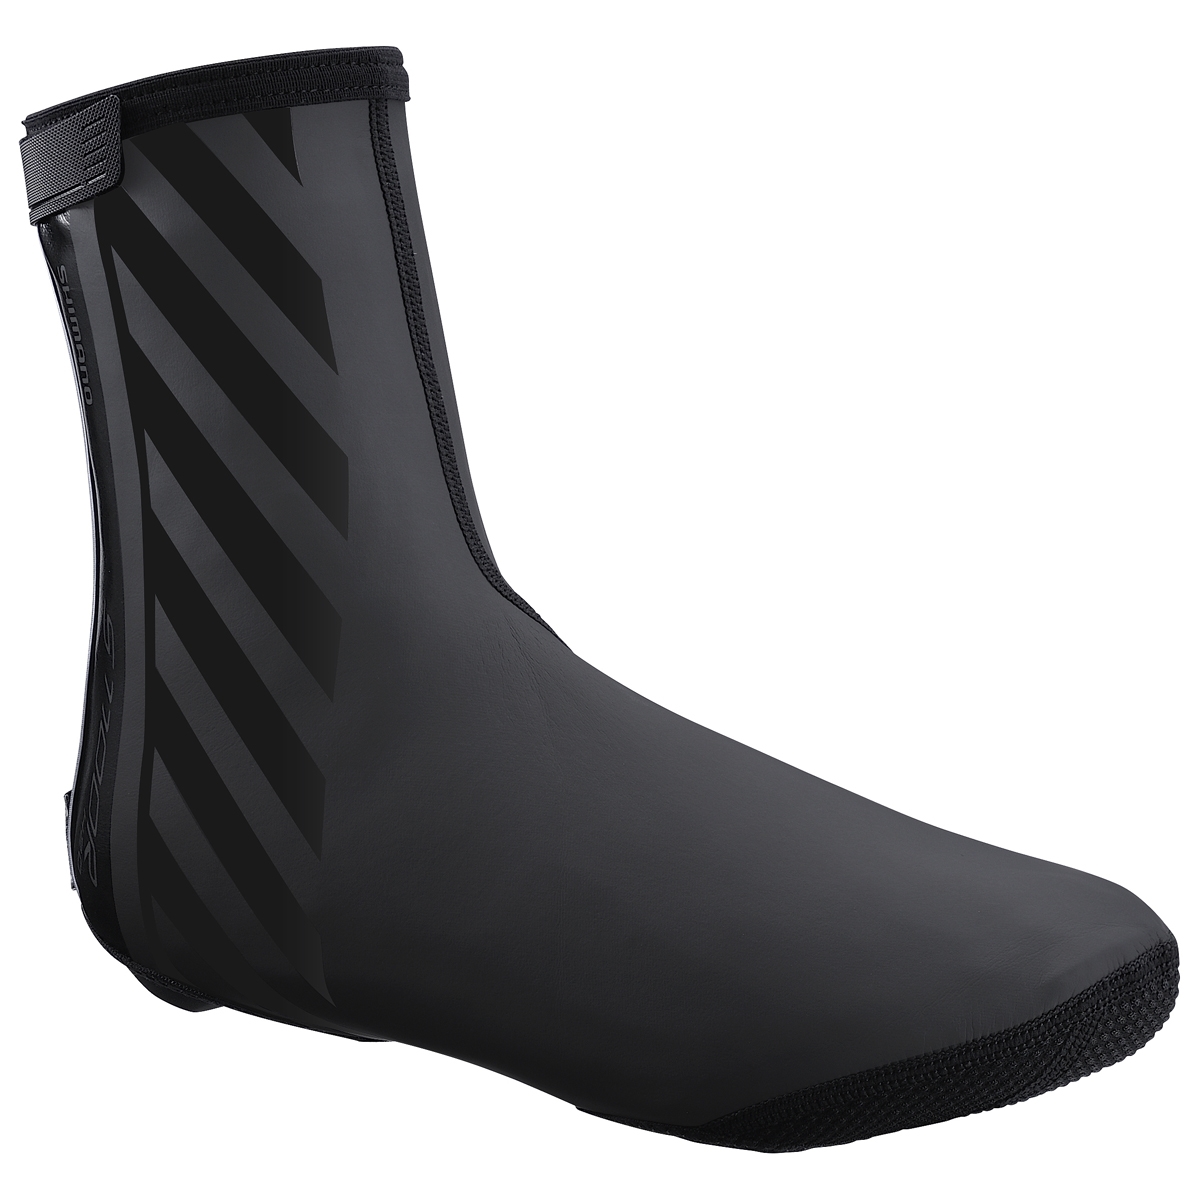 Shoe covers road S1100R H2O black size M (40-42)